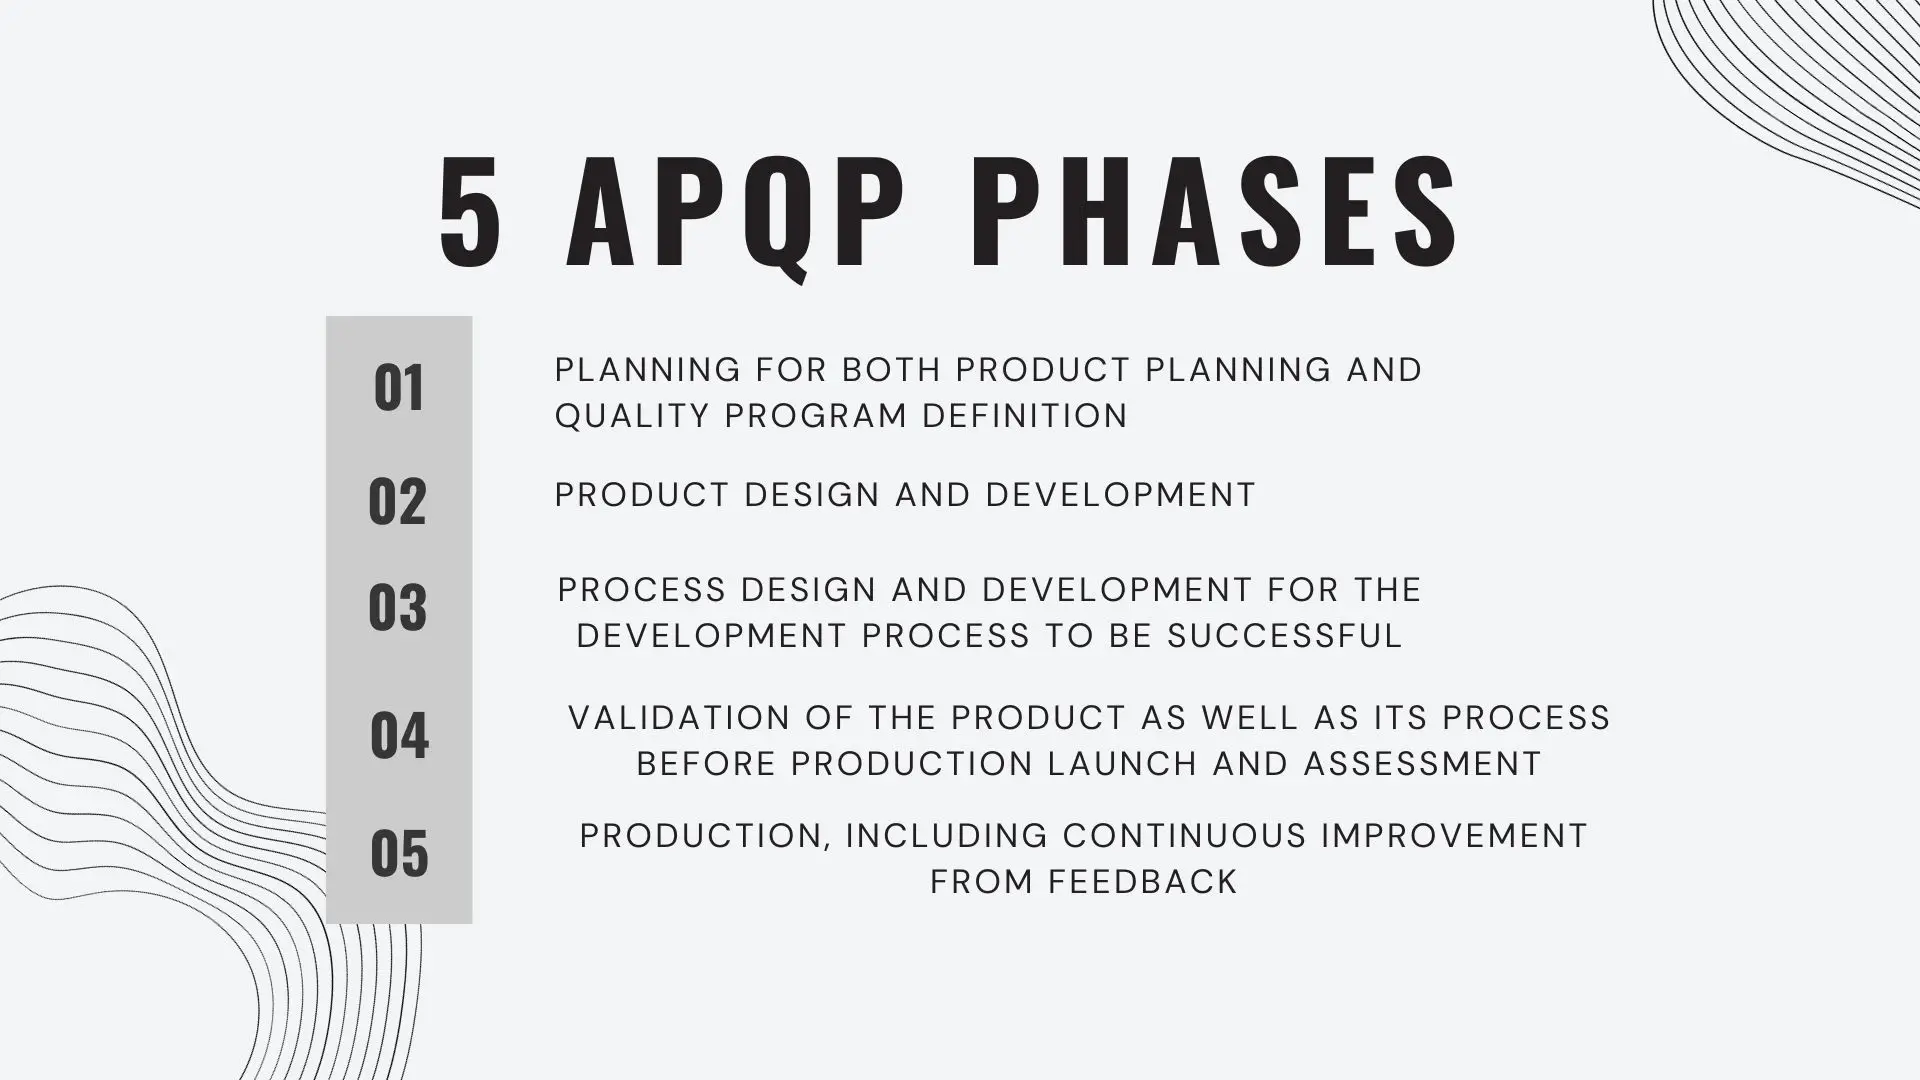 An image representing the five phases of APQP, which are: Planning and Definition, PD&D, Process Design and Development, Product and Process Validation, and Launch, Feedback, Assessment and Corrective Action. Learn what are the 5 phases of APQP with this helpful visual.